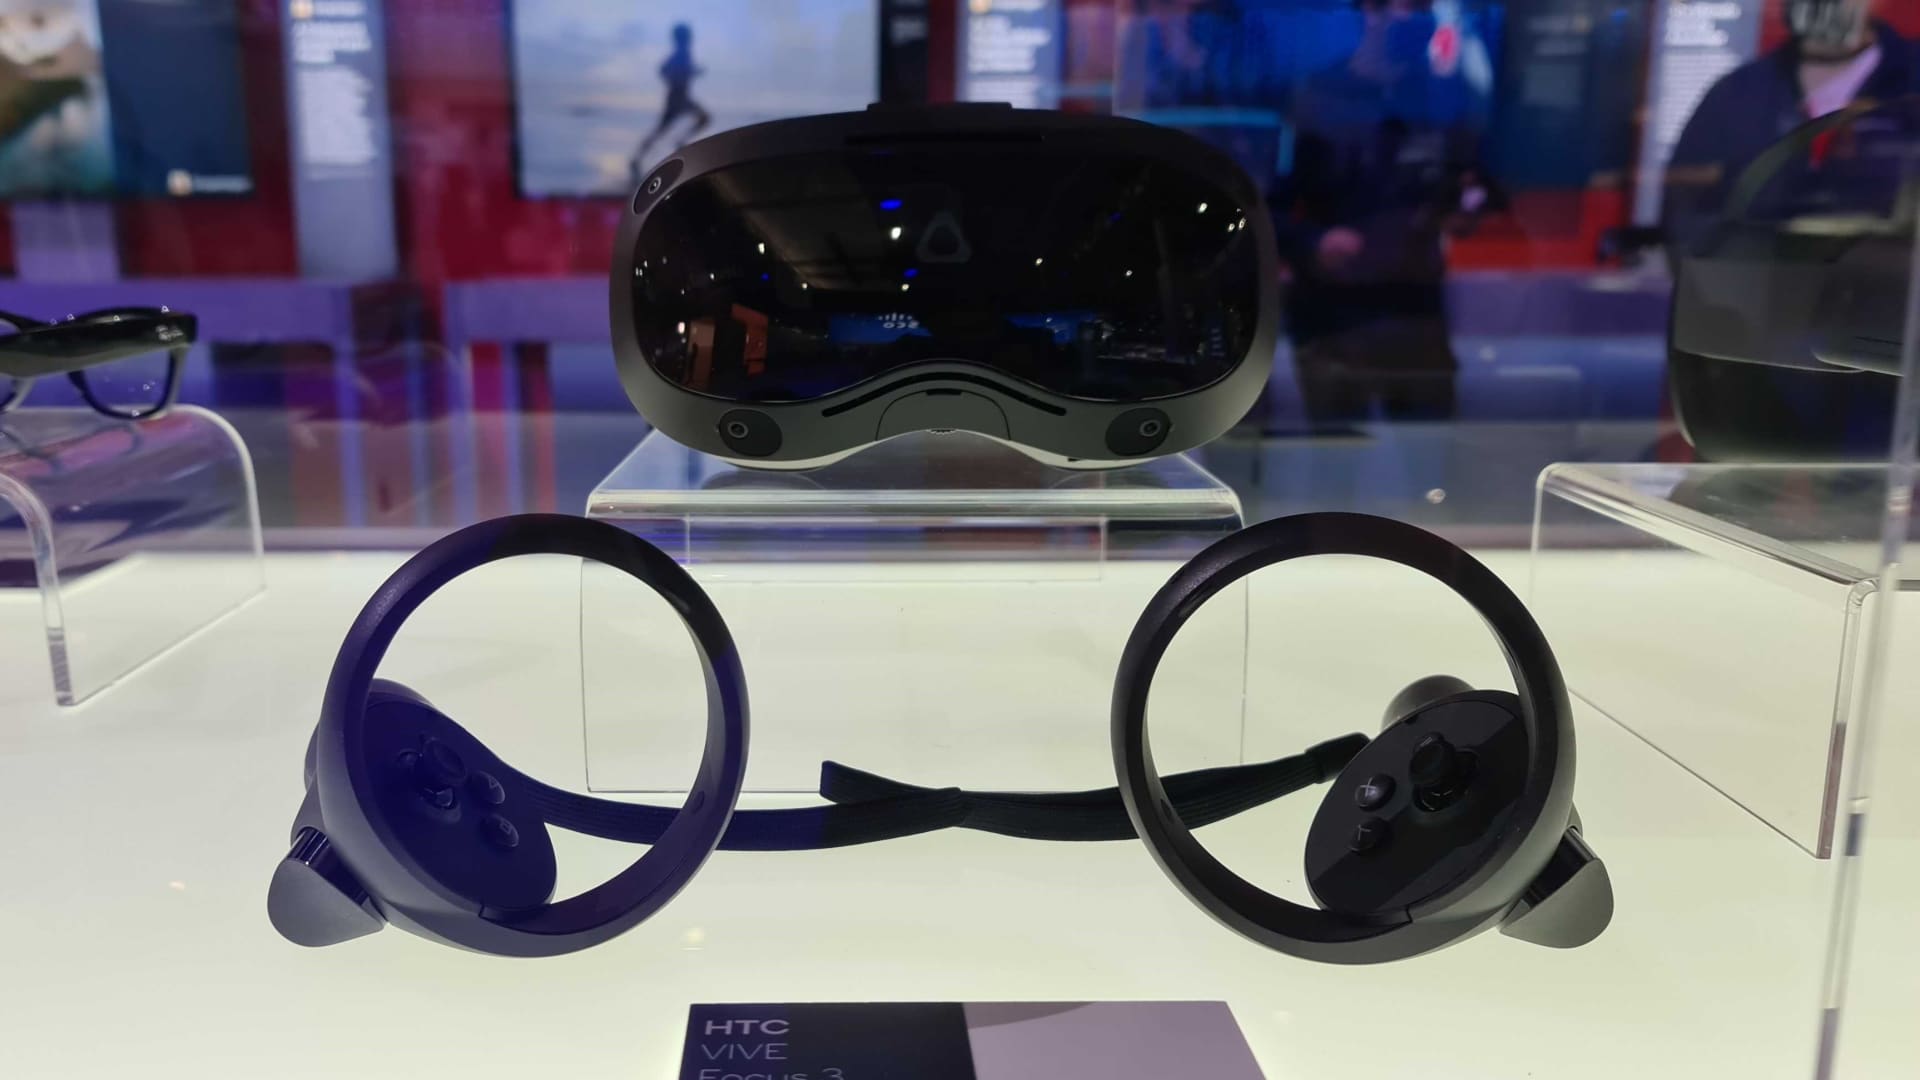 HTC's Vive Focus 3 virtual reality headset on display at Mobile World Congress 2022 in Barcelona, Spain.